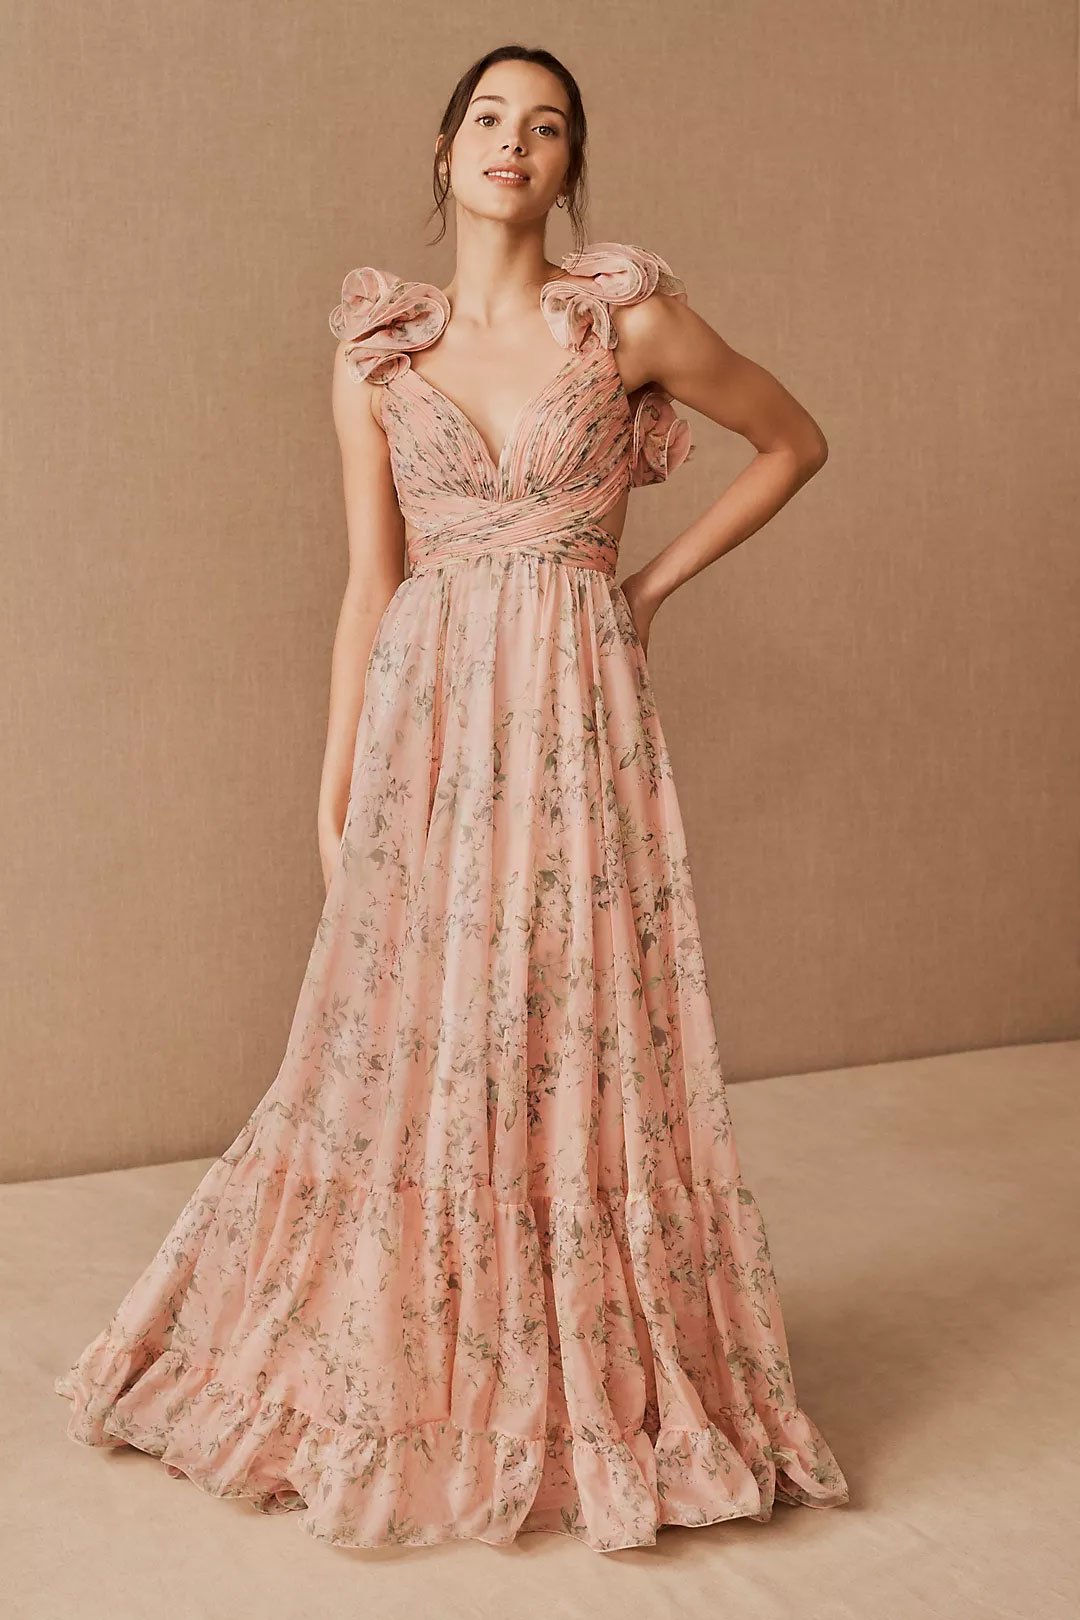 floral ruffle blush bridesmaid dress from Anthropologie